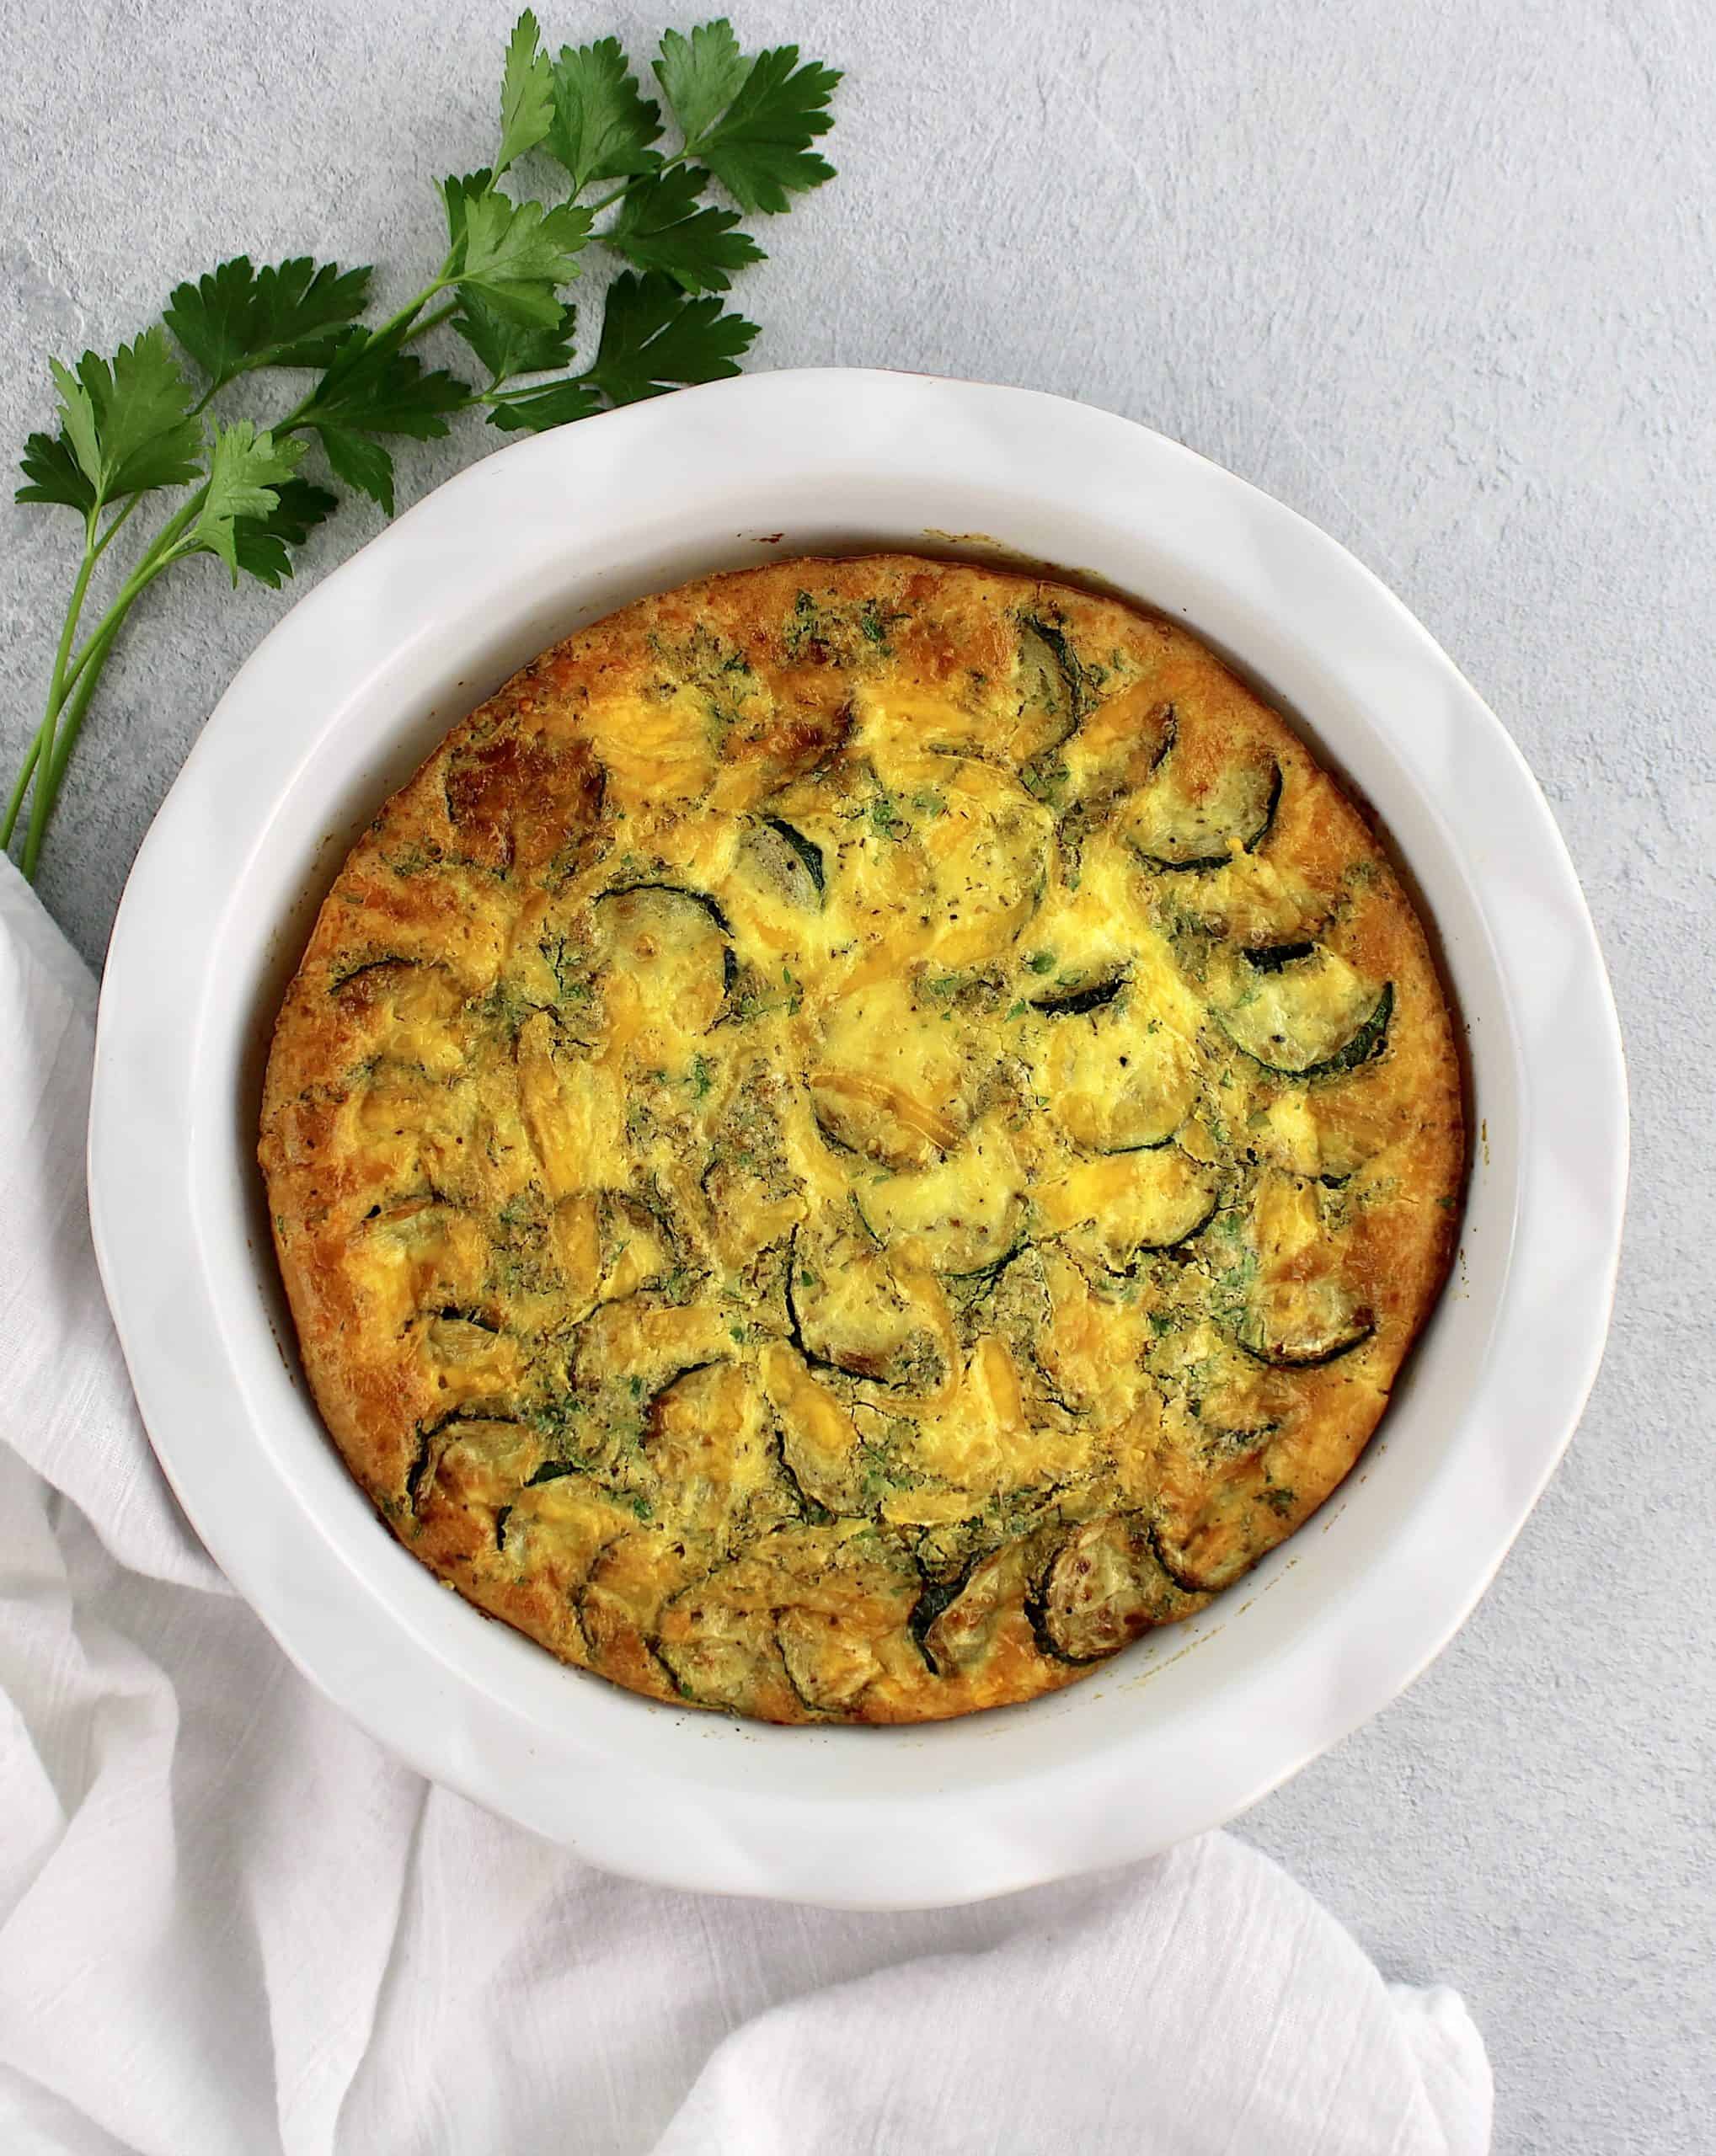 Crustless Zucchini Quiche in white pie dish with parsley on side